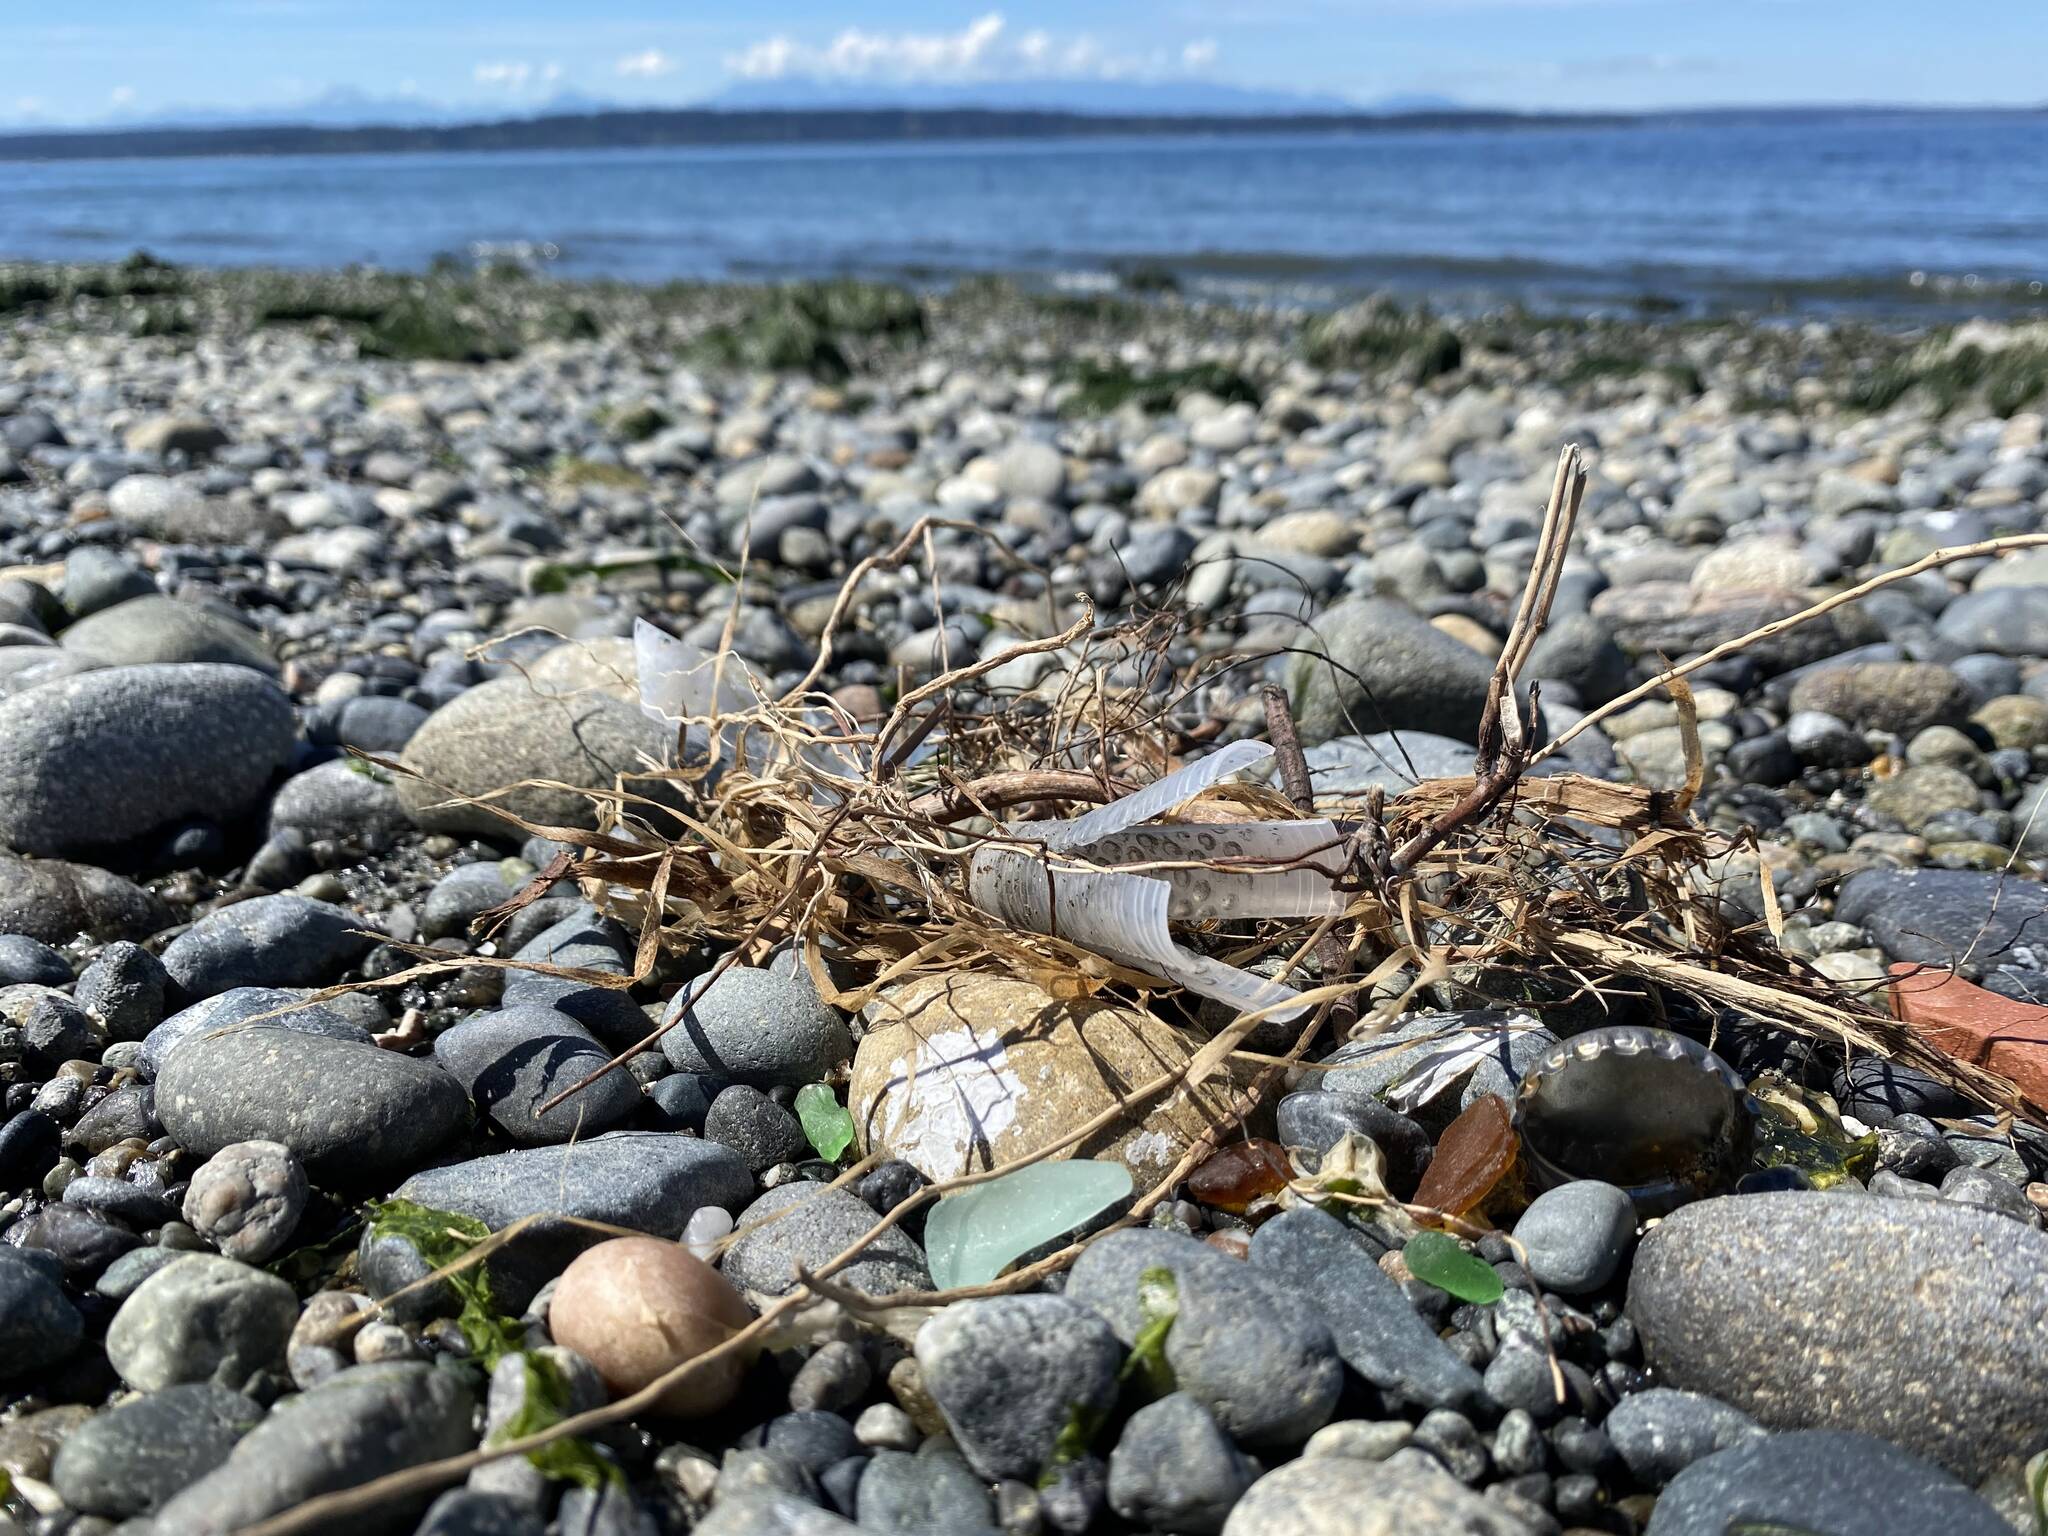 Beach litter at Discovery Park in Seattle includes a plastic shotgun wad, pieces of glass (green), a metal bottle cap (right foreground) and a piece of brick (far right). Volunteers’ surveys showed that non-plastic items like metal, glass and cement are more common on Puget Sound beaches than on the outer coast. Researchers say this suggests most of the litter in Puget Sound is generated locally. Credit: Kathy Willis/University of Washington